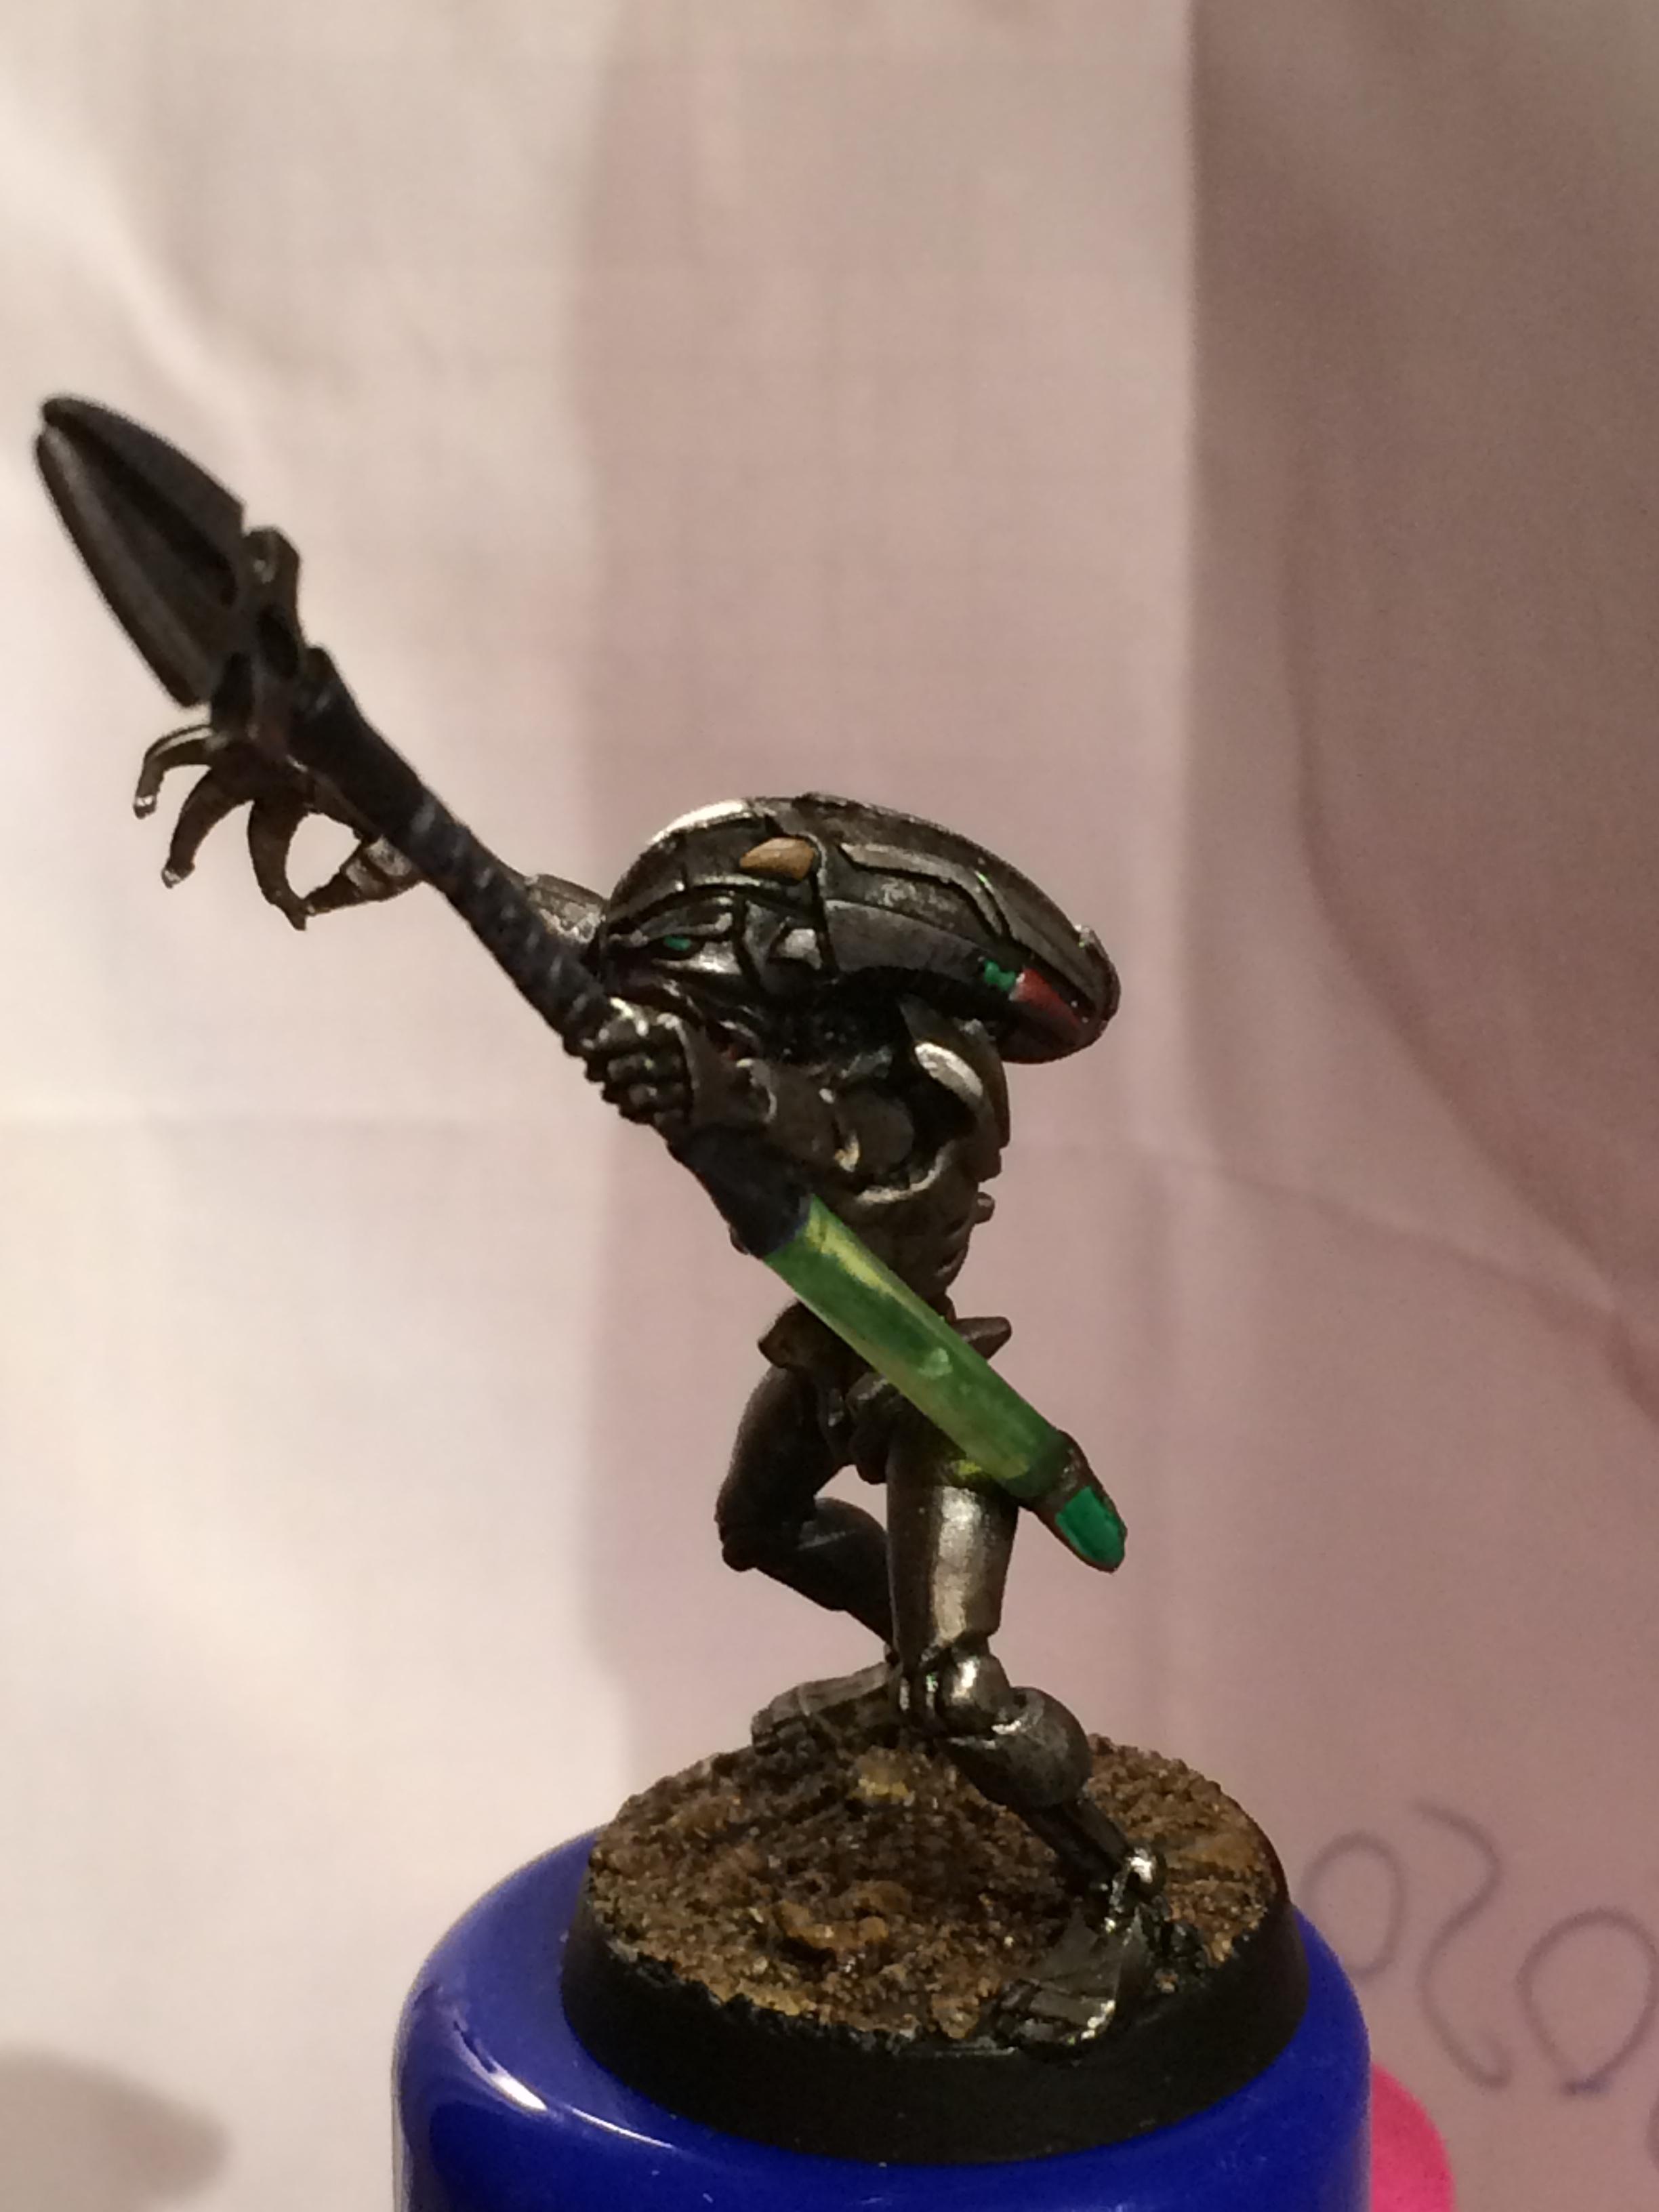 Conversion, Cool, Fast, Little Bit Wip, Lord, Metal, Necrons, Old, Oldhammer, Painting, Quest, Rogue, School, Simple, Star, Starquest, Style, Trader